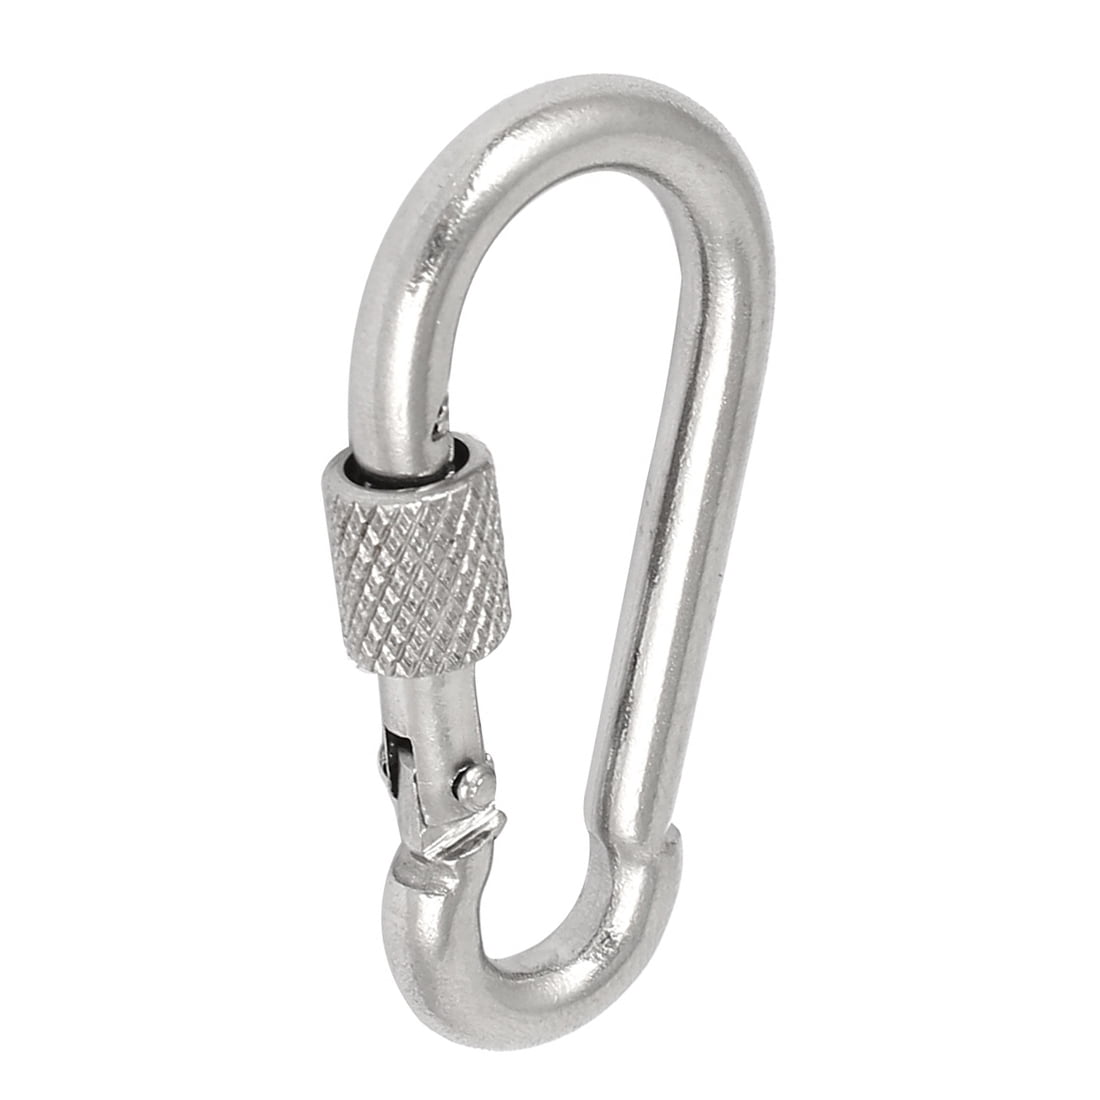 Moonight Stainless Steel 304 Spring Snap Hook Carabiner Screw Lock Holds up to 1000Lbs 1pcs,2pcs,4pcs Perfect Tire & Disc Swings 